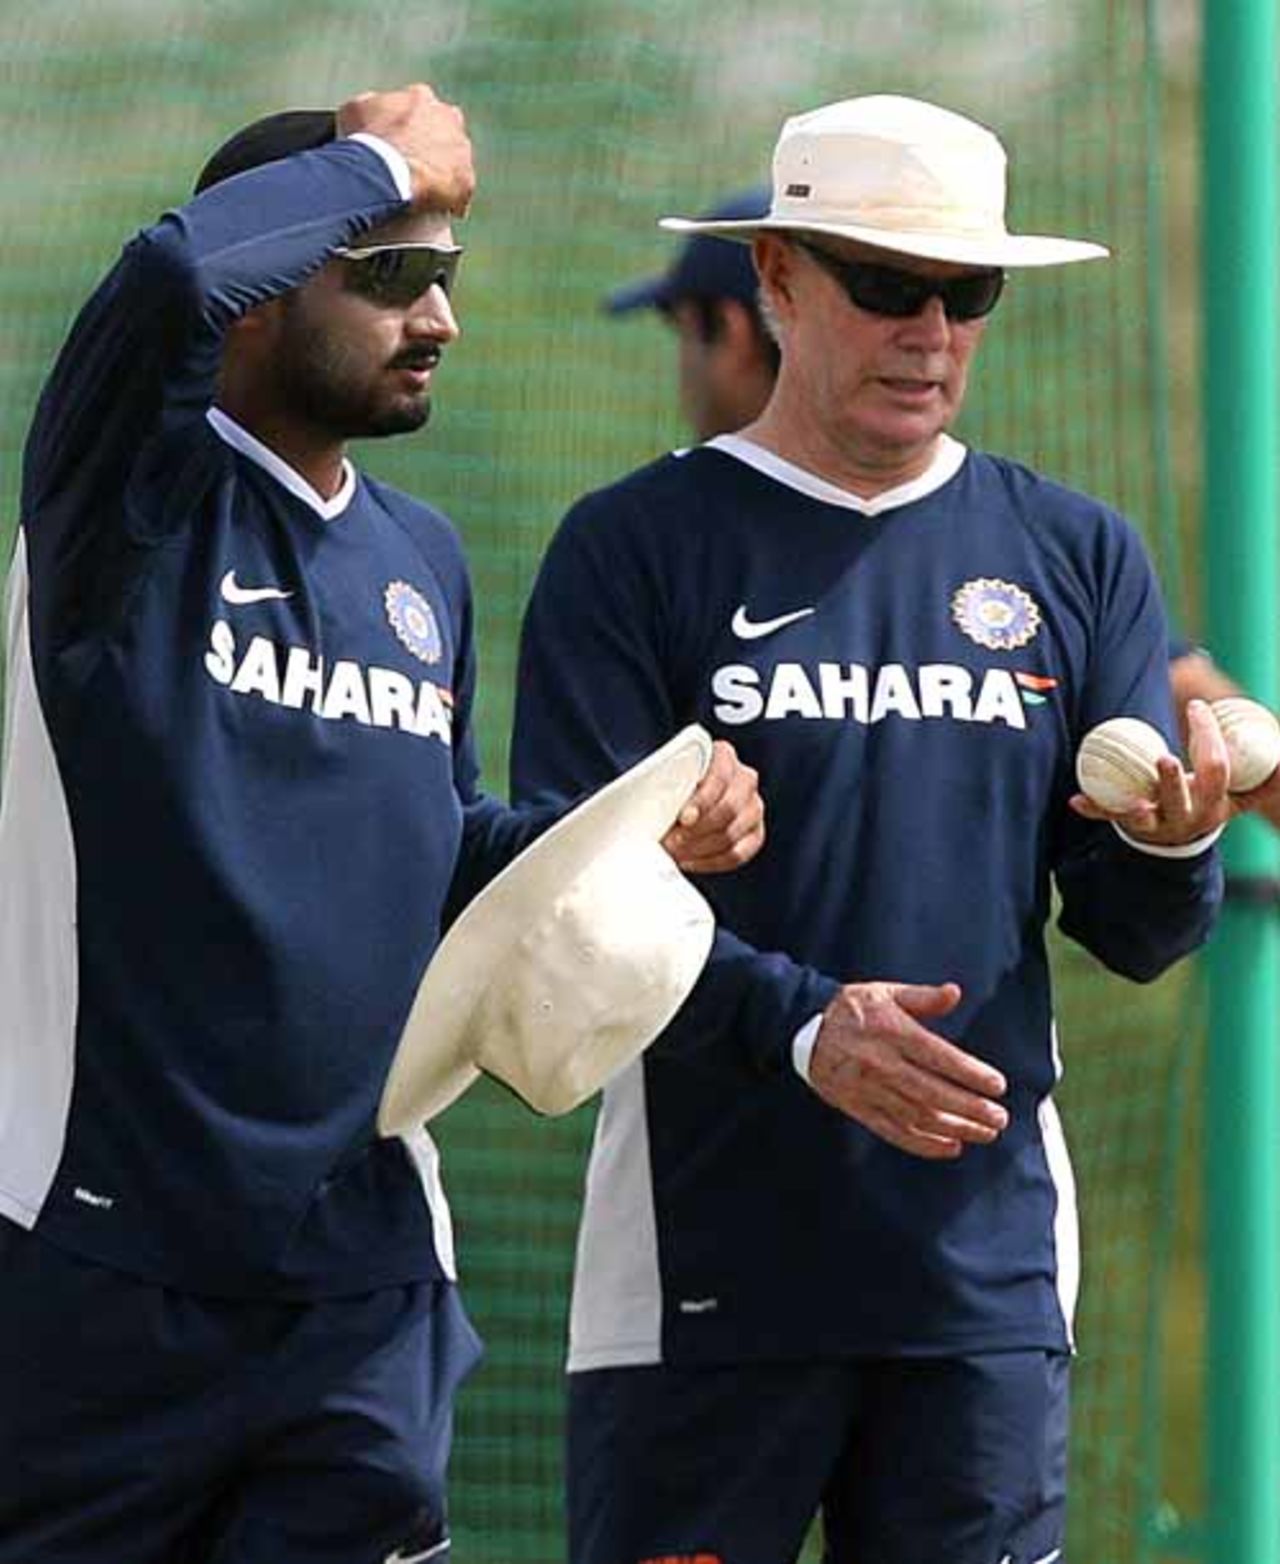 Harbhajan Singh and Greg Chappell have a chat during India's practice session at Couva, Trinidad, March 14, 2007